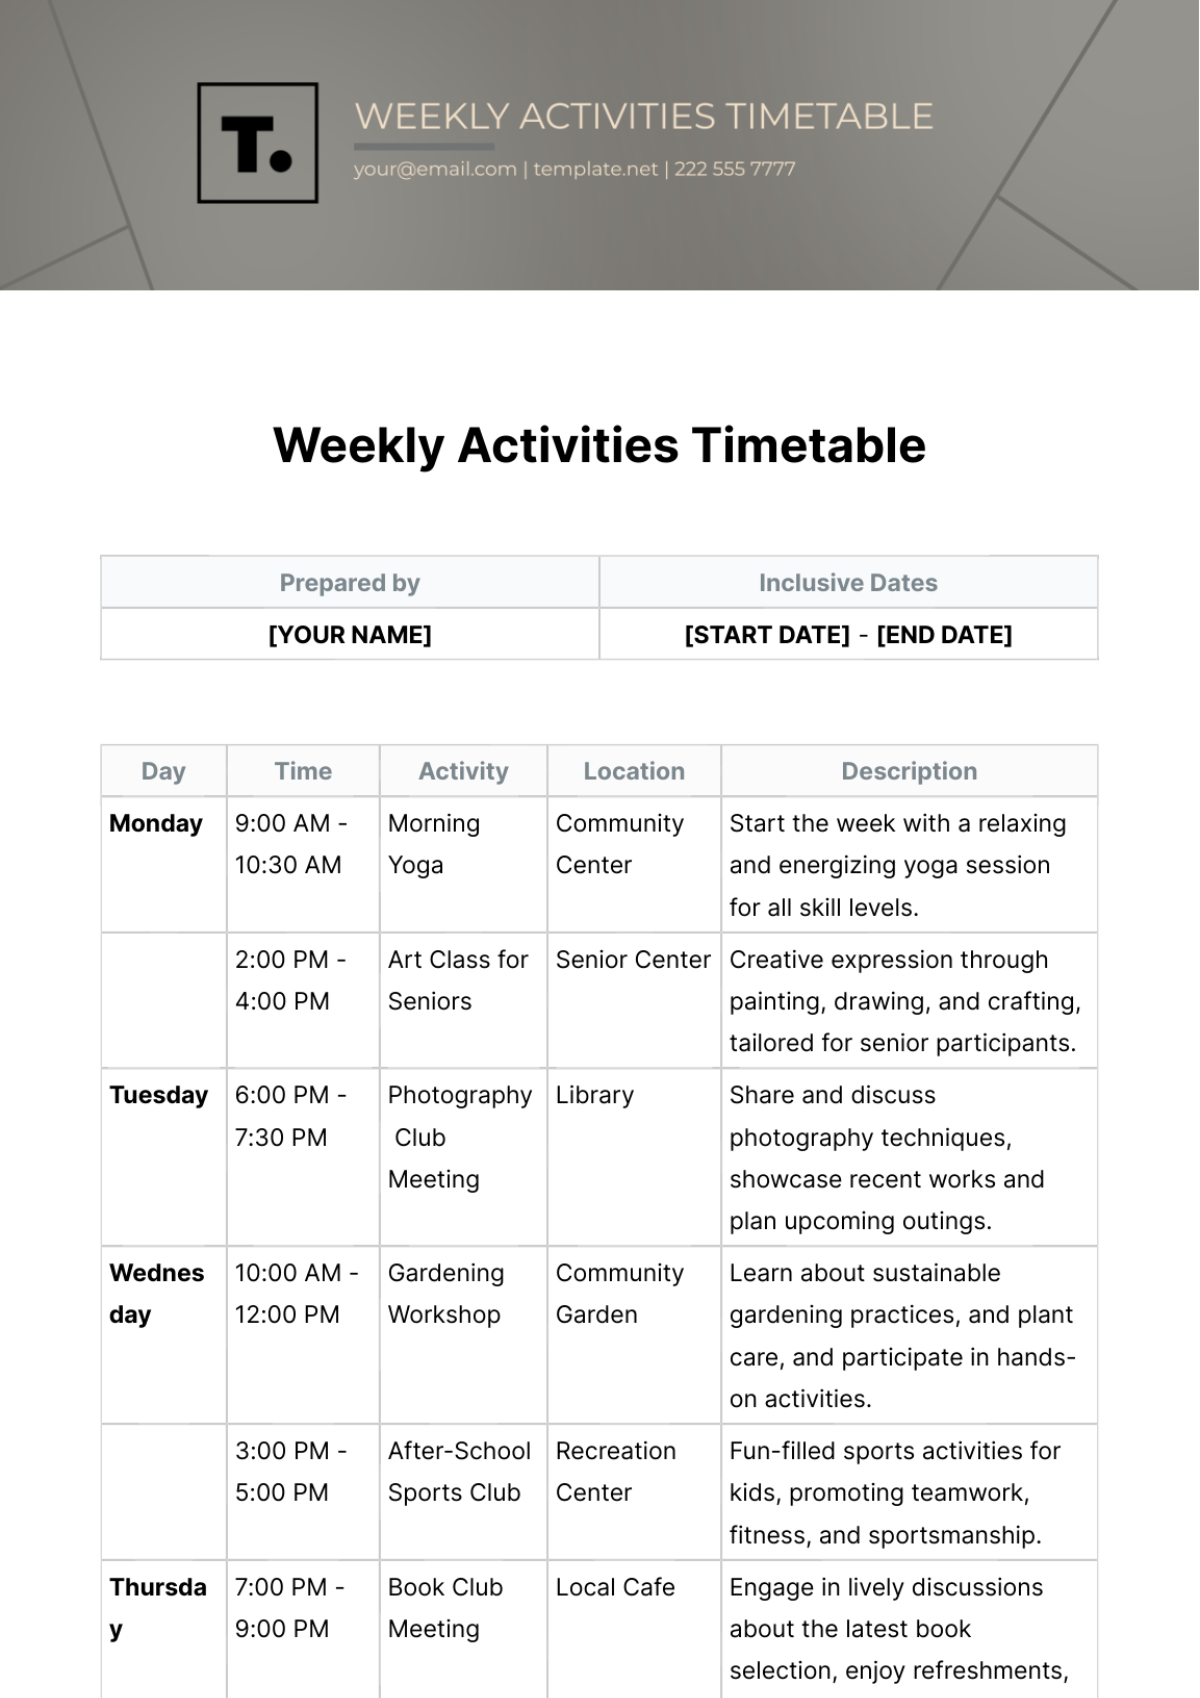 Free Weekly Activities Timetable Template